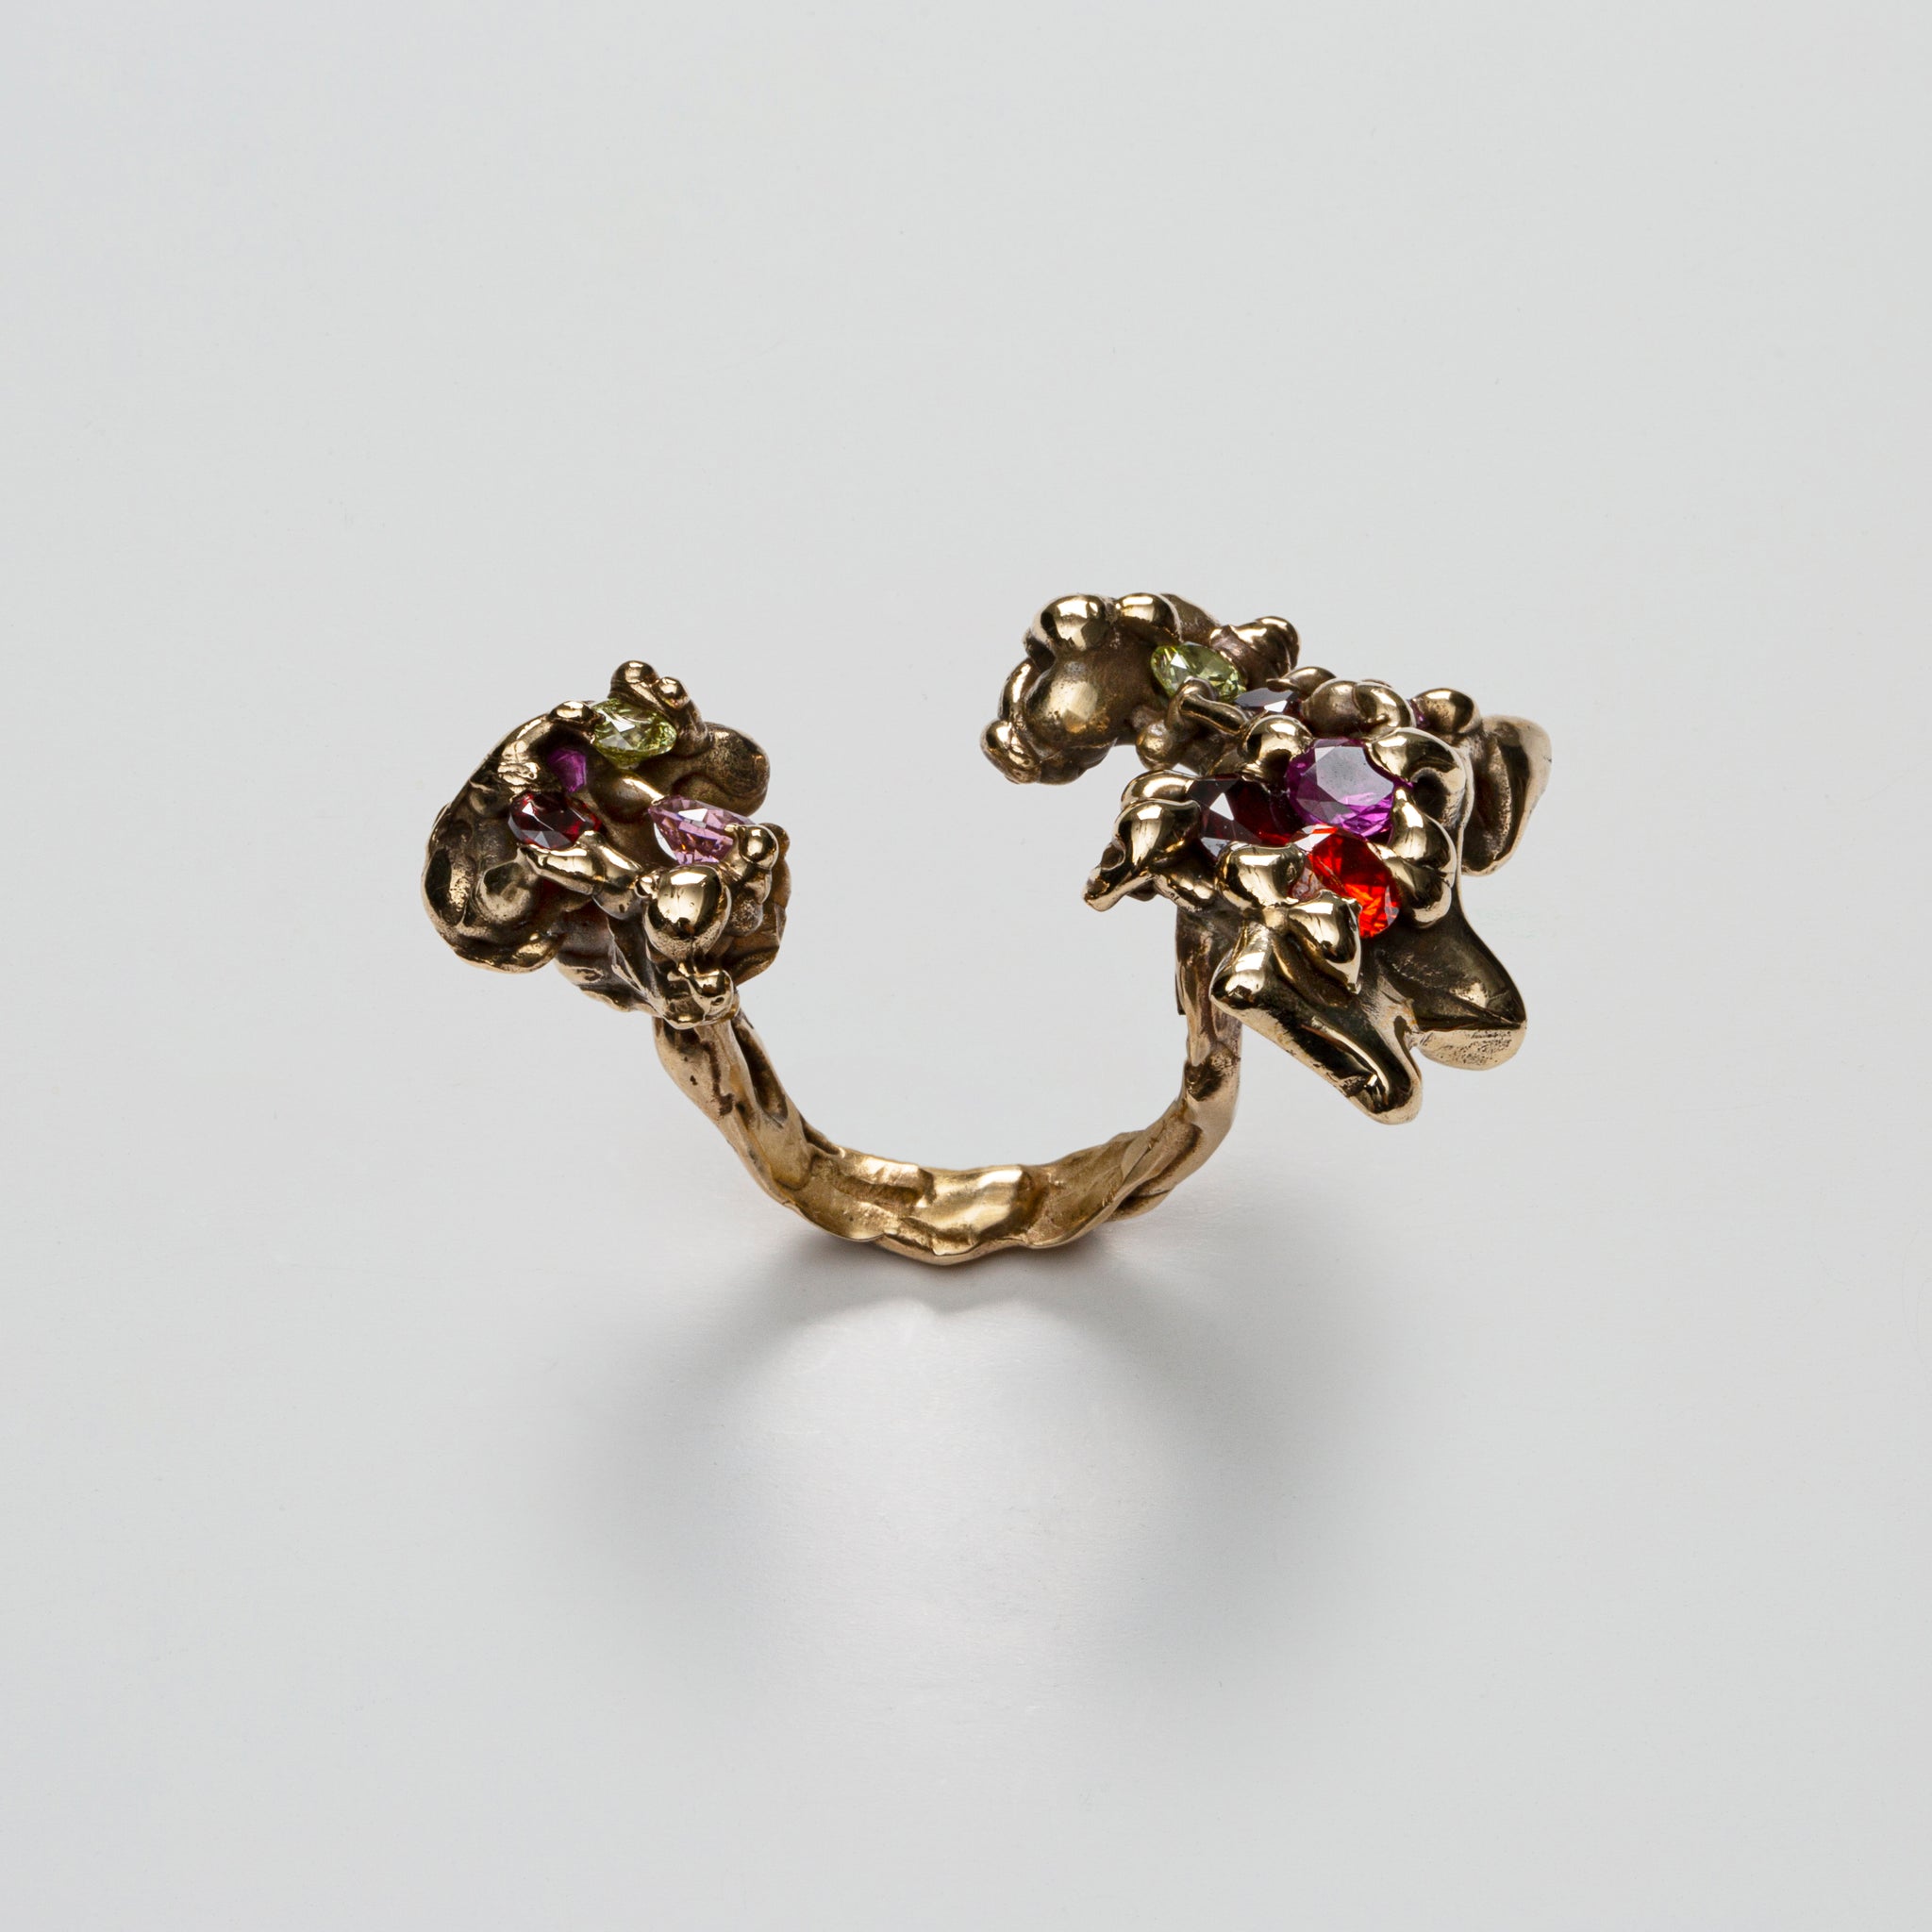 Open Archetype Ring in Bronze with Gems - Large III